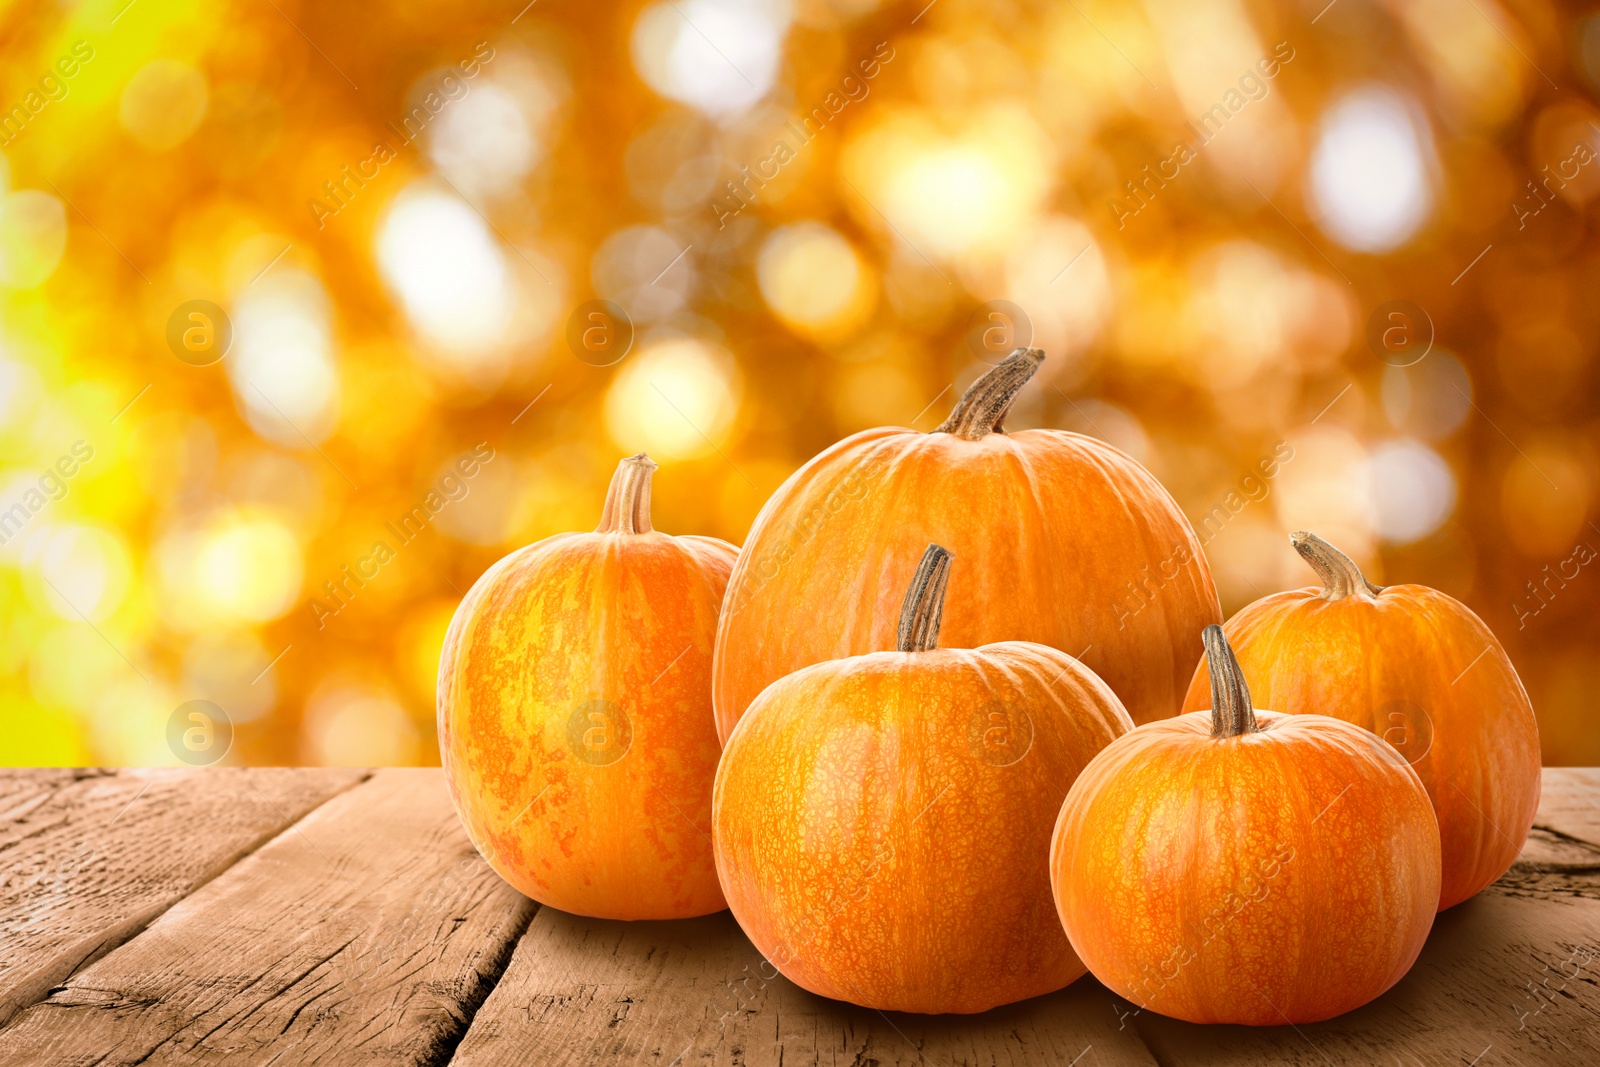 Image of Fresh pumpkins on wooden table outdoors in autumn